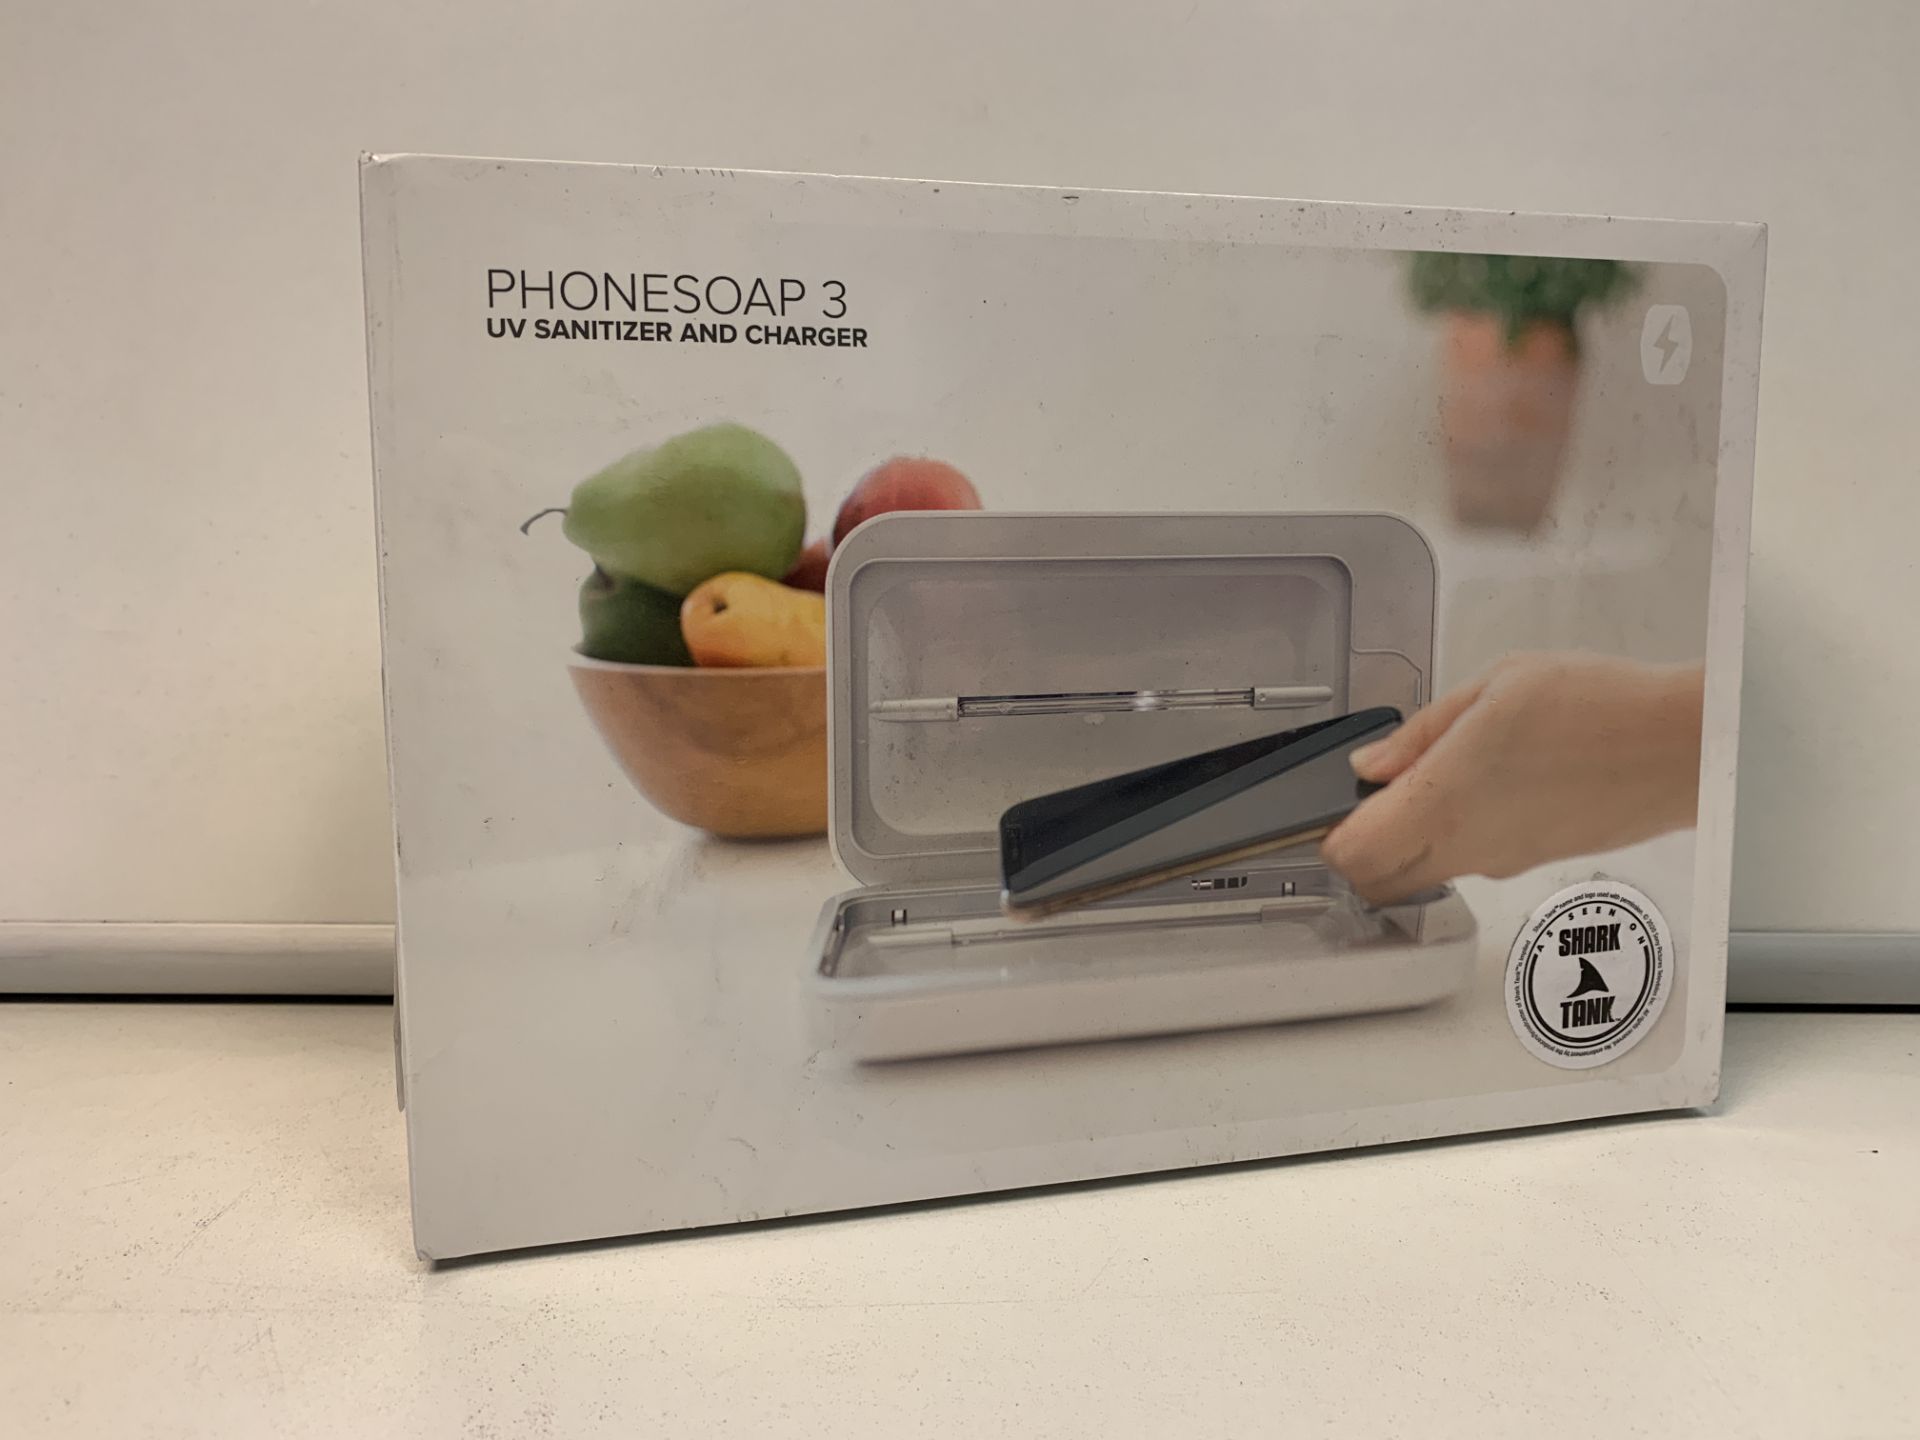 BRAND NEW PHONESOAP 3 UV SANITIZER AND CHARGER RRP £90 INSL